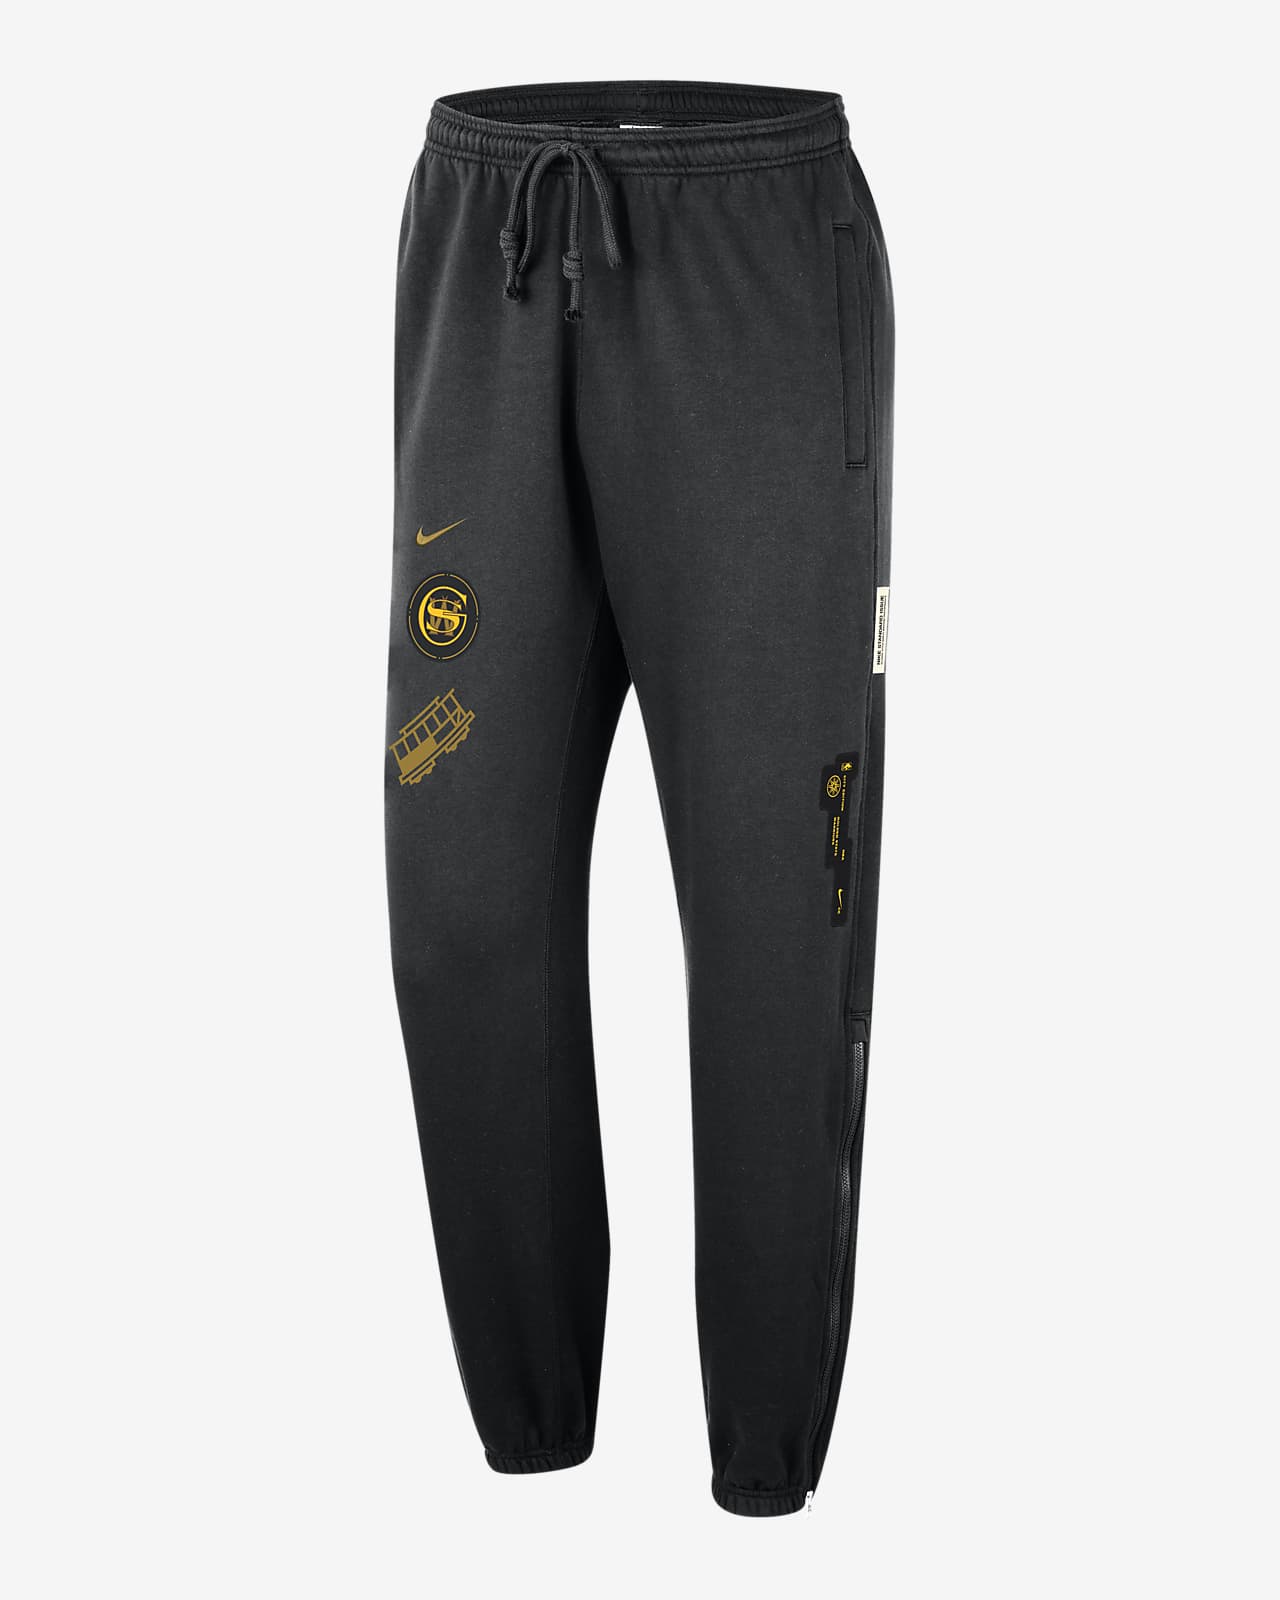 Golden State Warriors Standard Issue City Edition Men's Nike NBA Courtside  Pants.